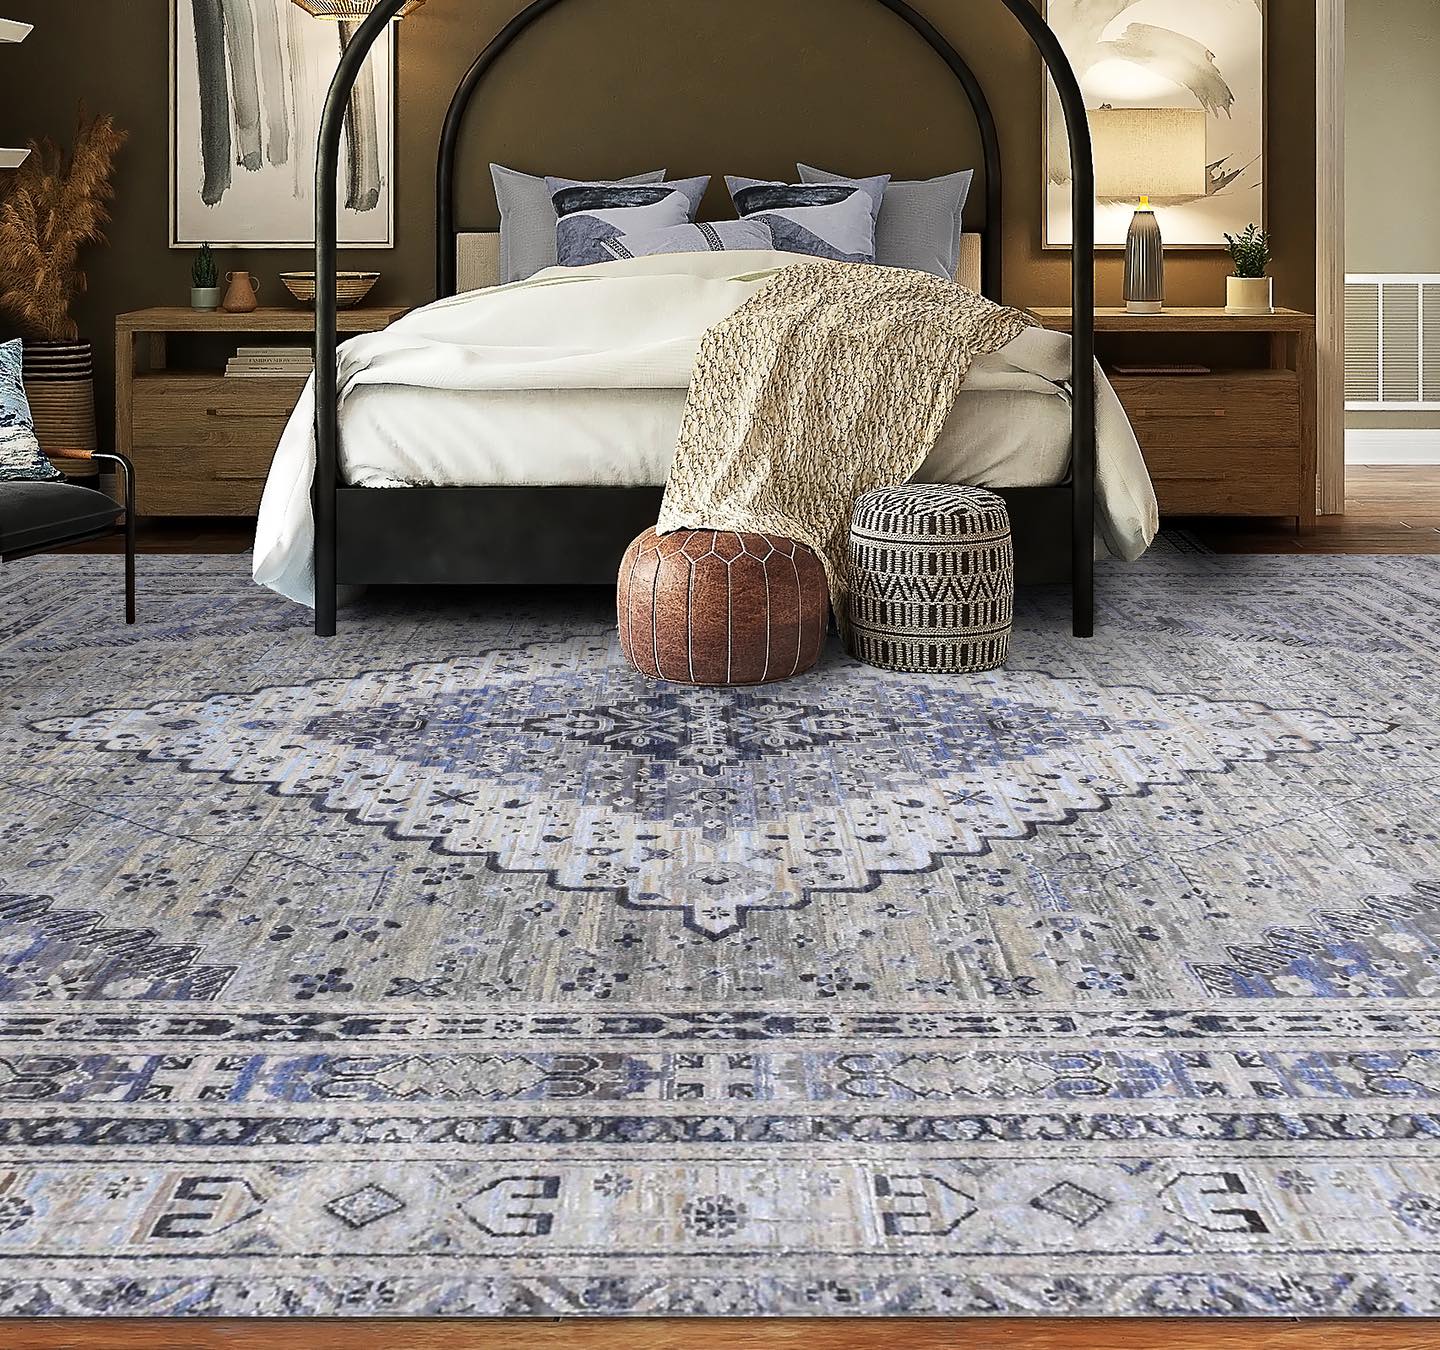 A spacious bedroom with a sizable blue and white area rug, adding a touch of elegance to the room's decor.